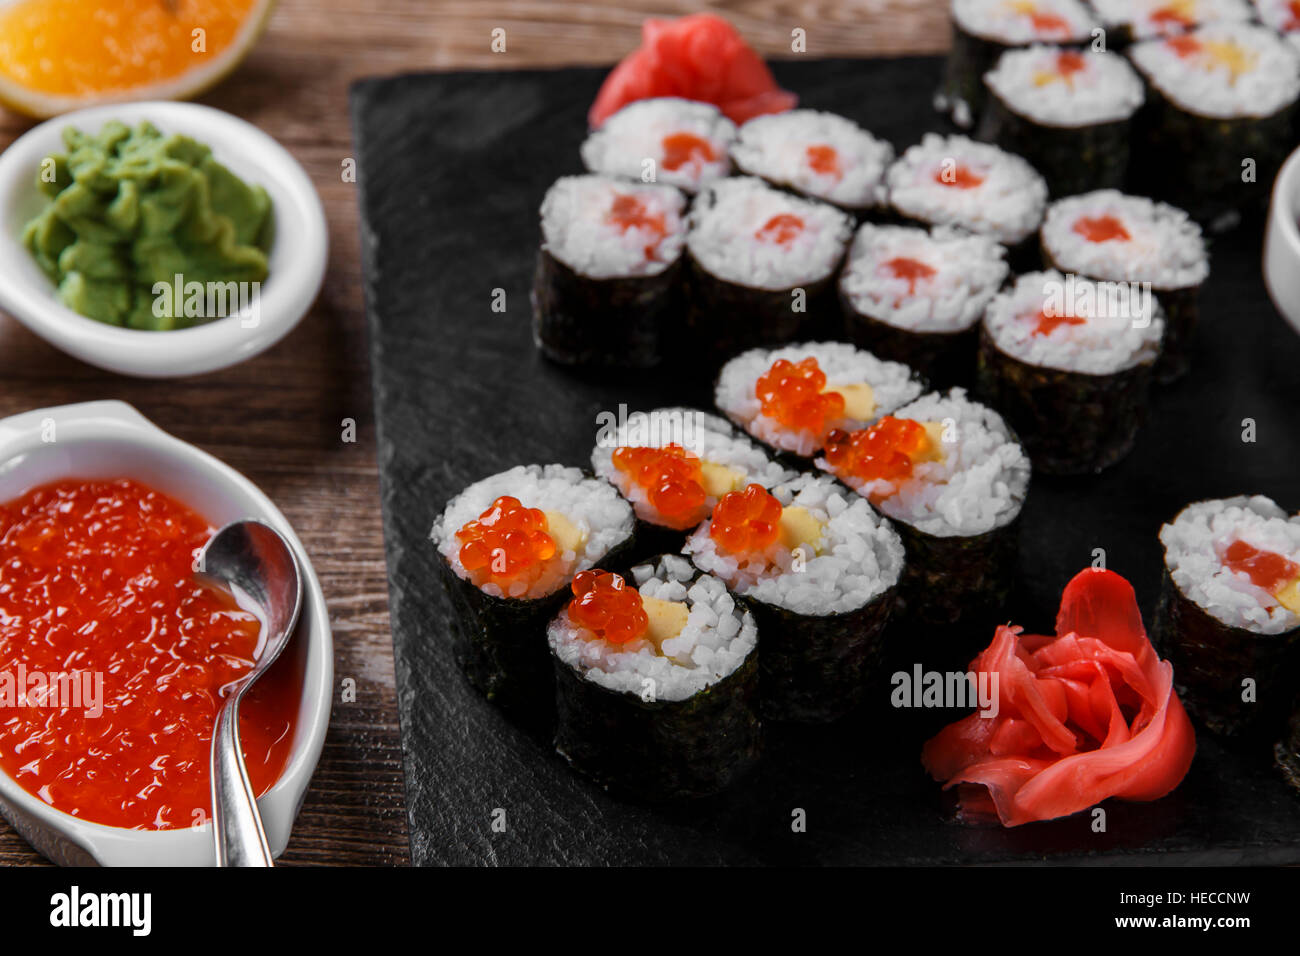 sushi rolls and ingredients served on a wooden surface Stock Photo